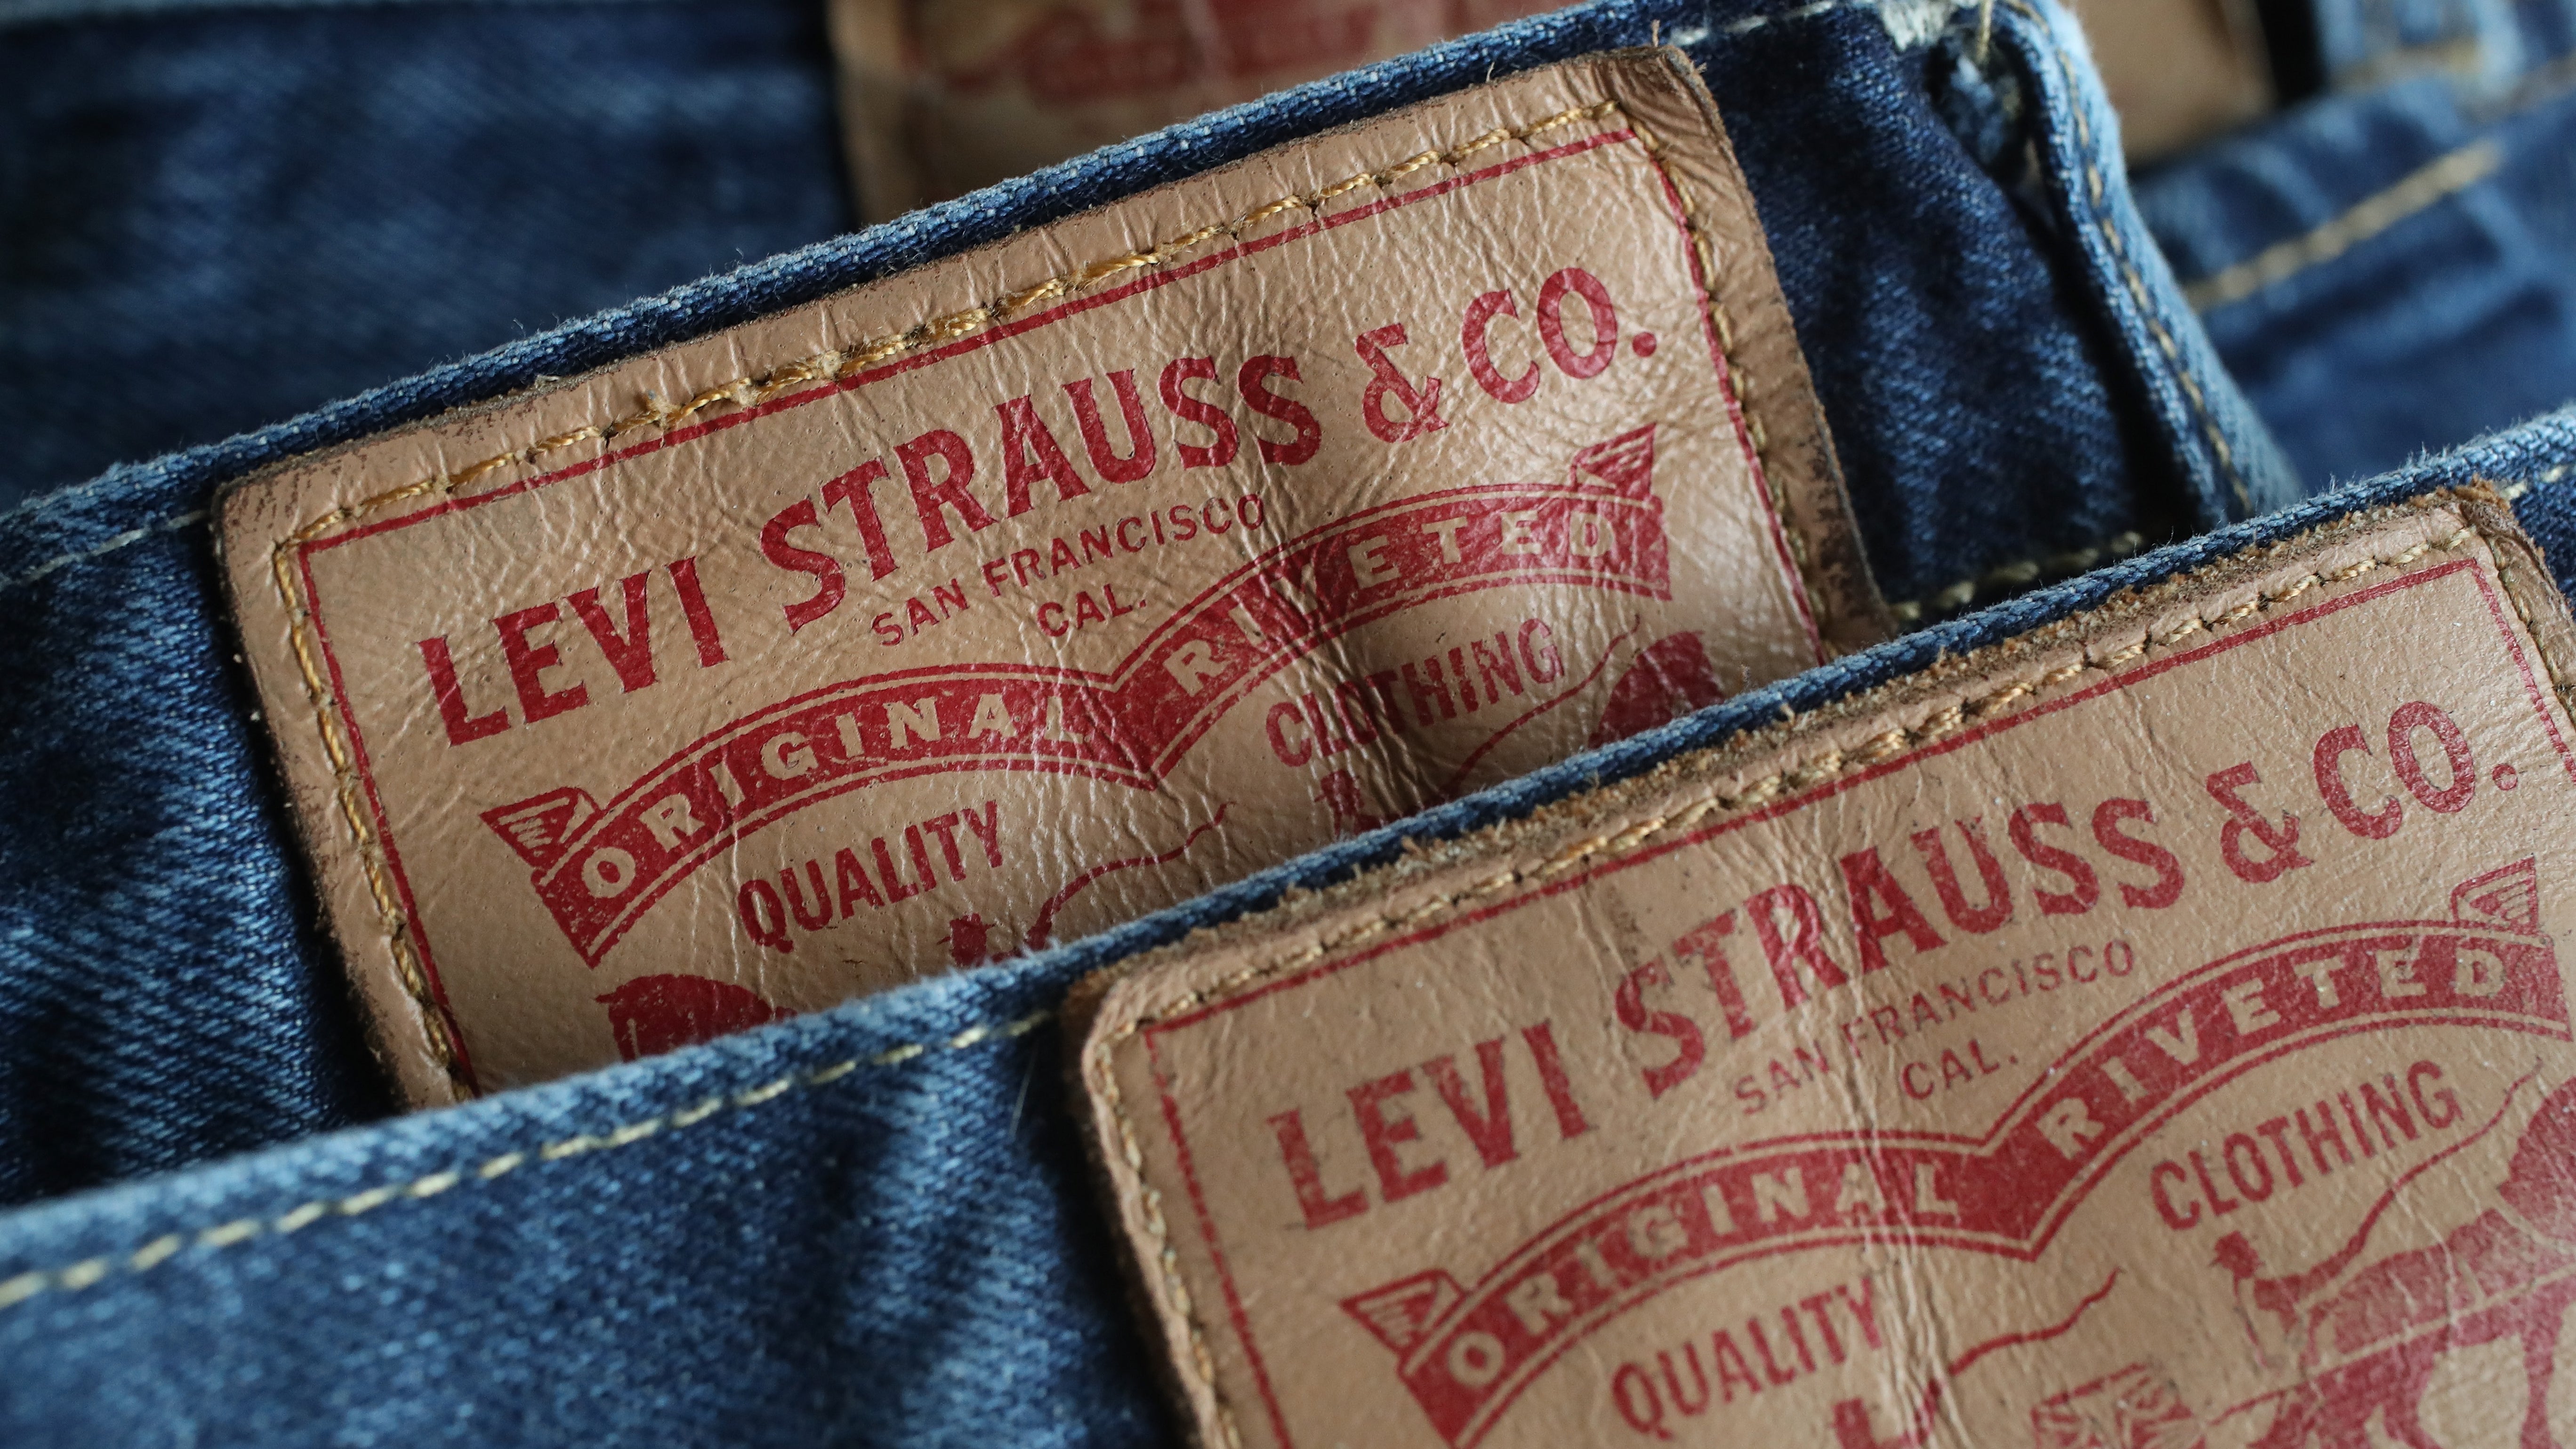 Levi Is Global Leader, And They Wear It Well (NYSE:LEVI) Seeking Alpha